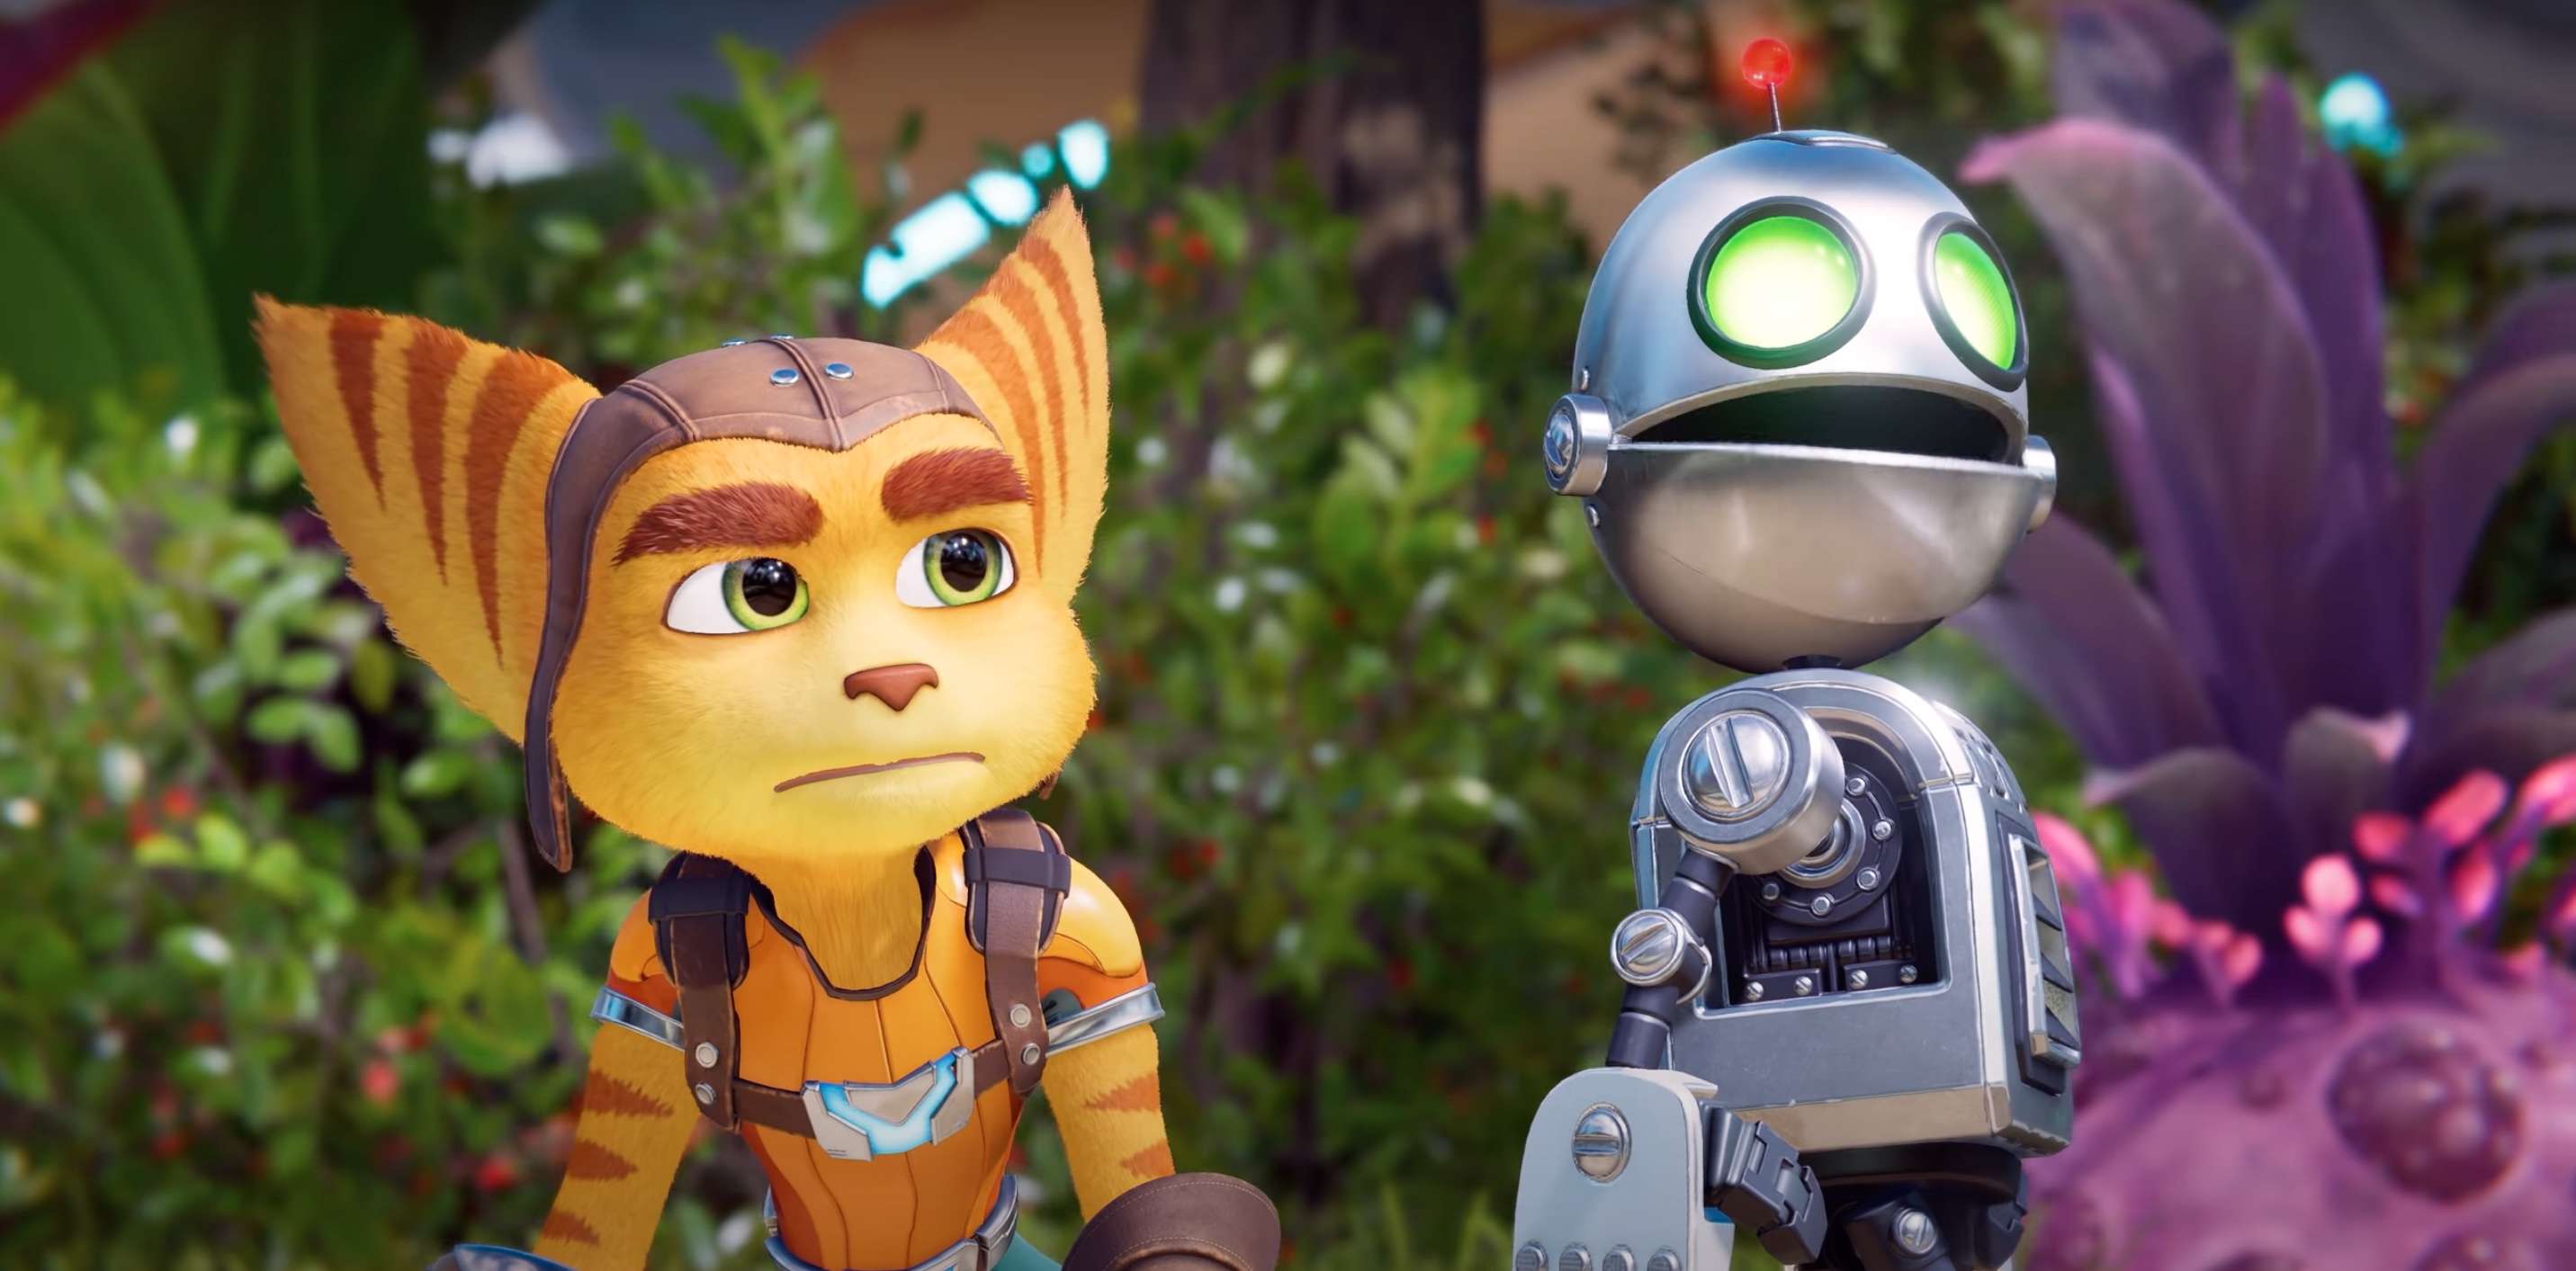 Ratchet & Clank: Rift Apart's PC release date revealed - Pre-order